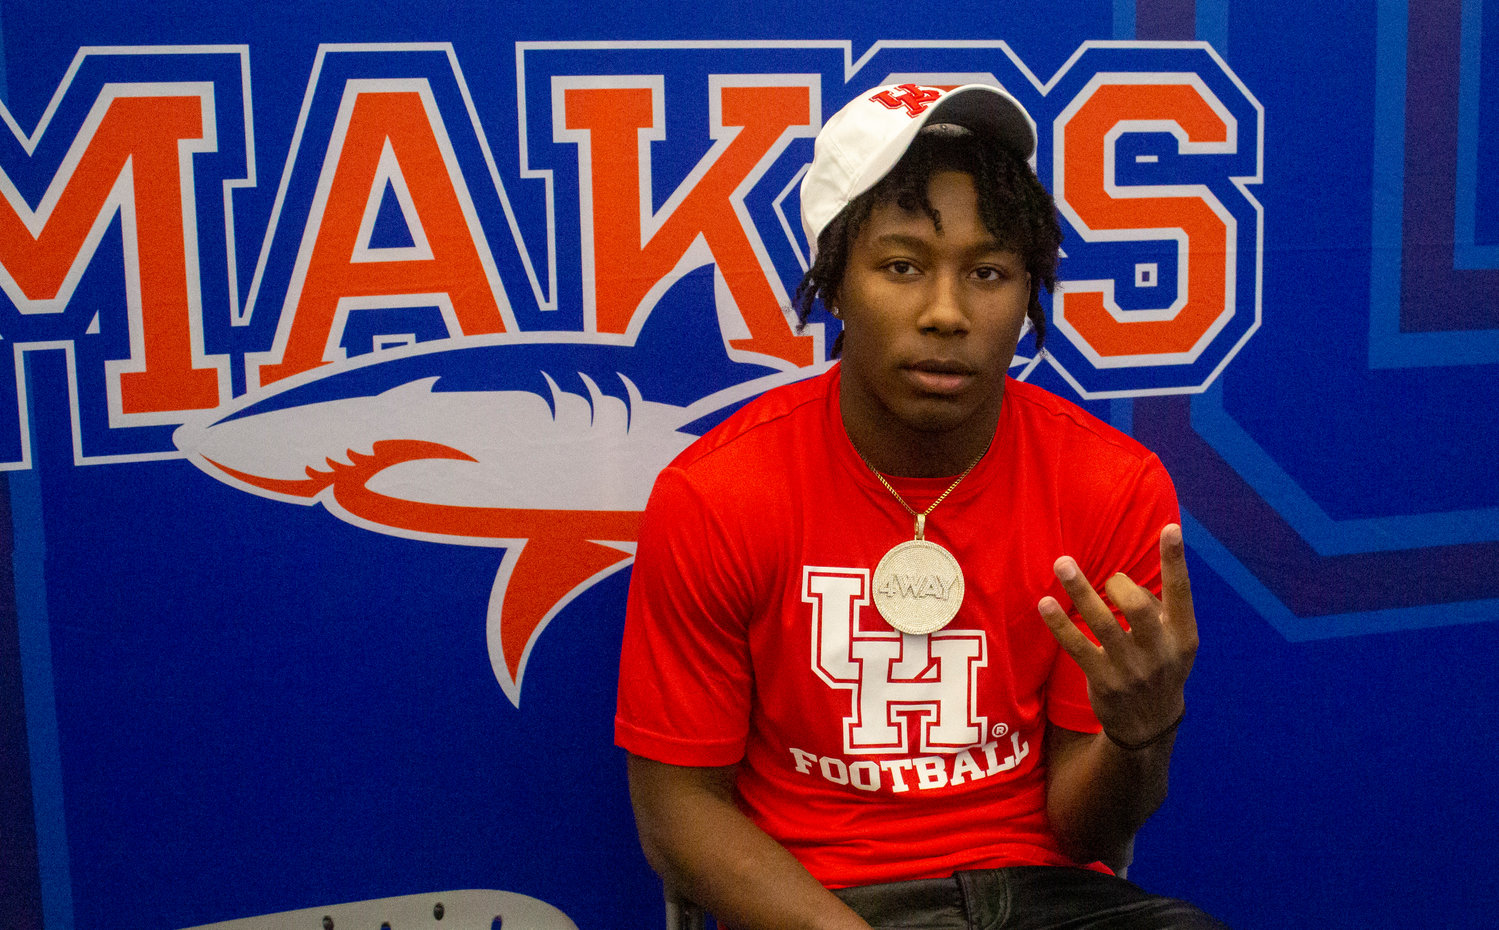 Chris Pearson puts up the University of Houston hand gesture after he cemented his commitment to the University of Houston football program as part of National Signing Day Wednesday, Dec. 21, during a ceremony at Orange Beach High School.